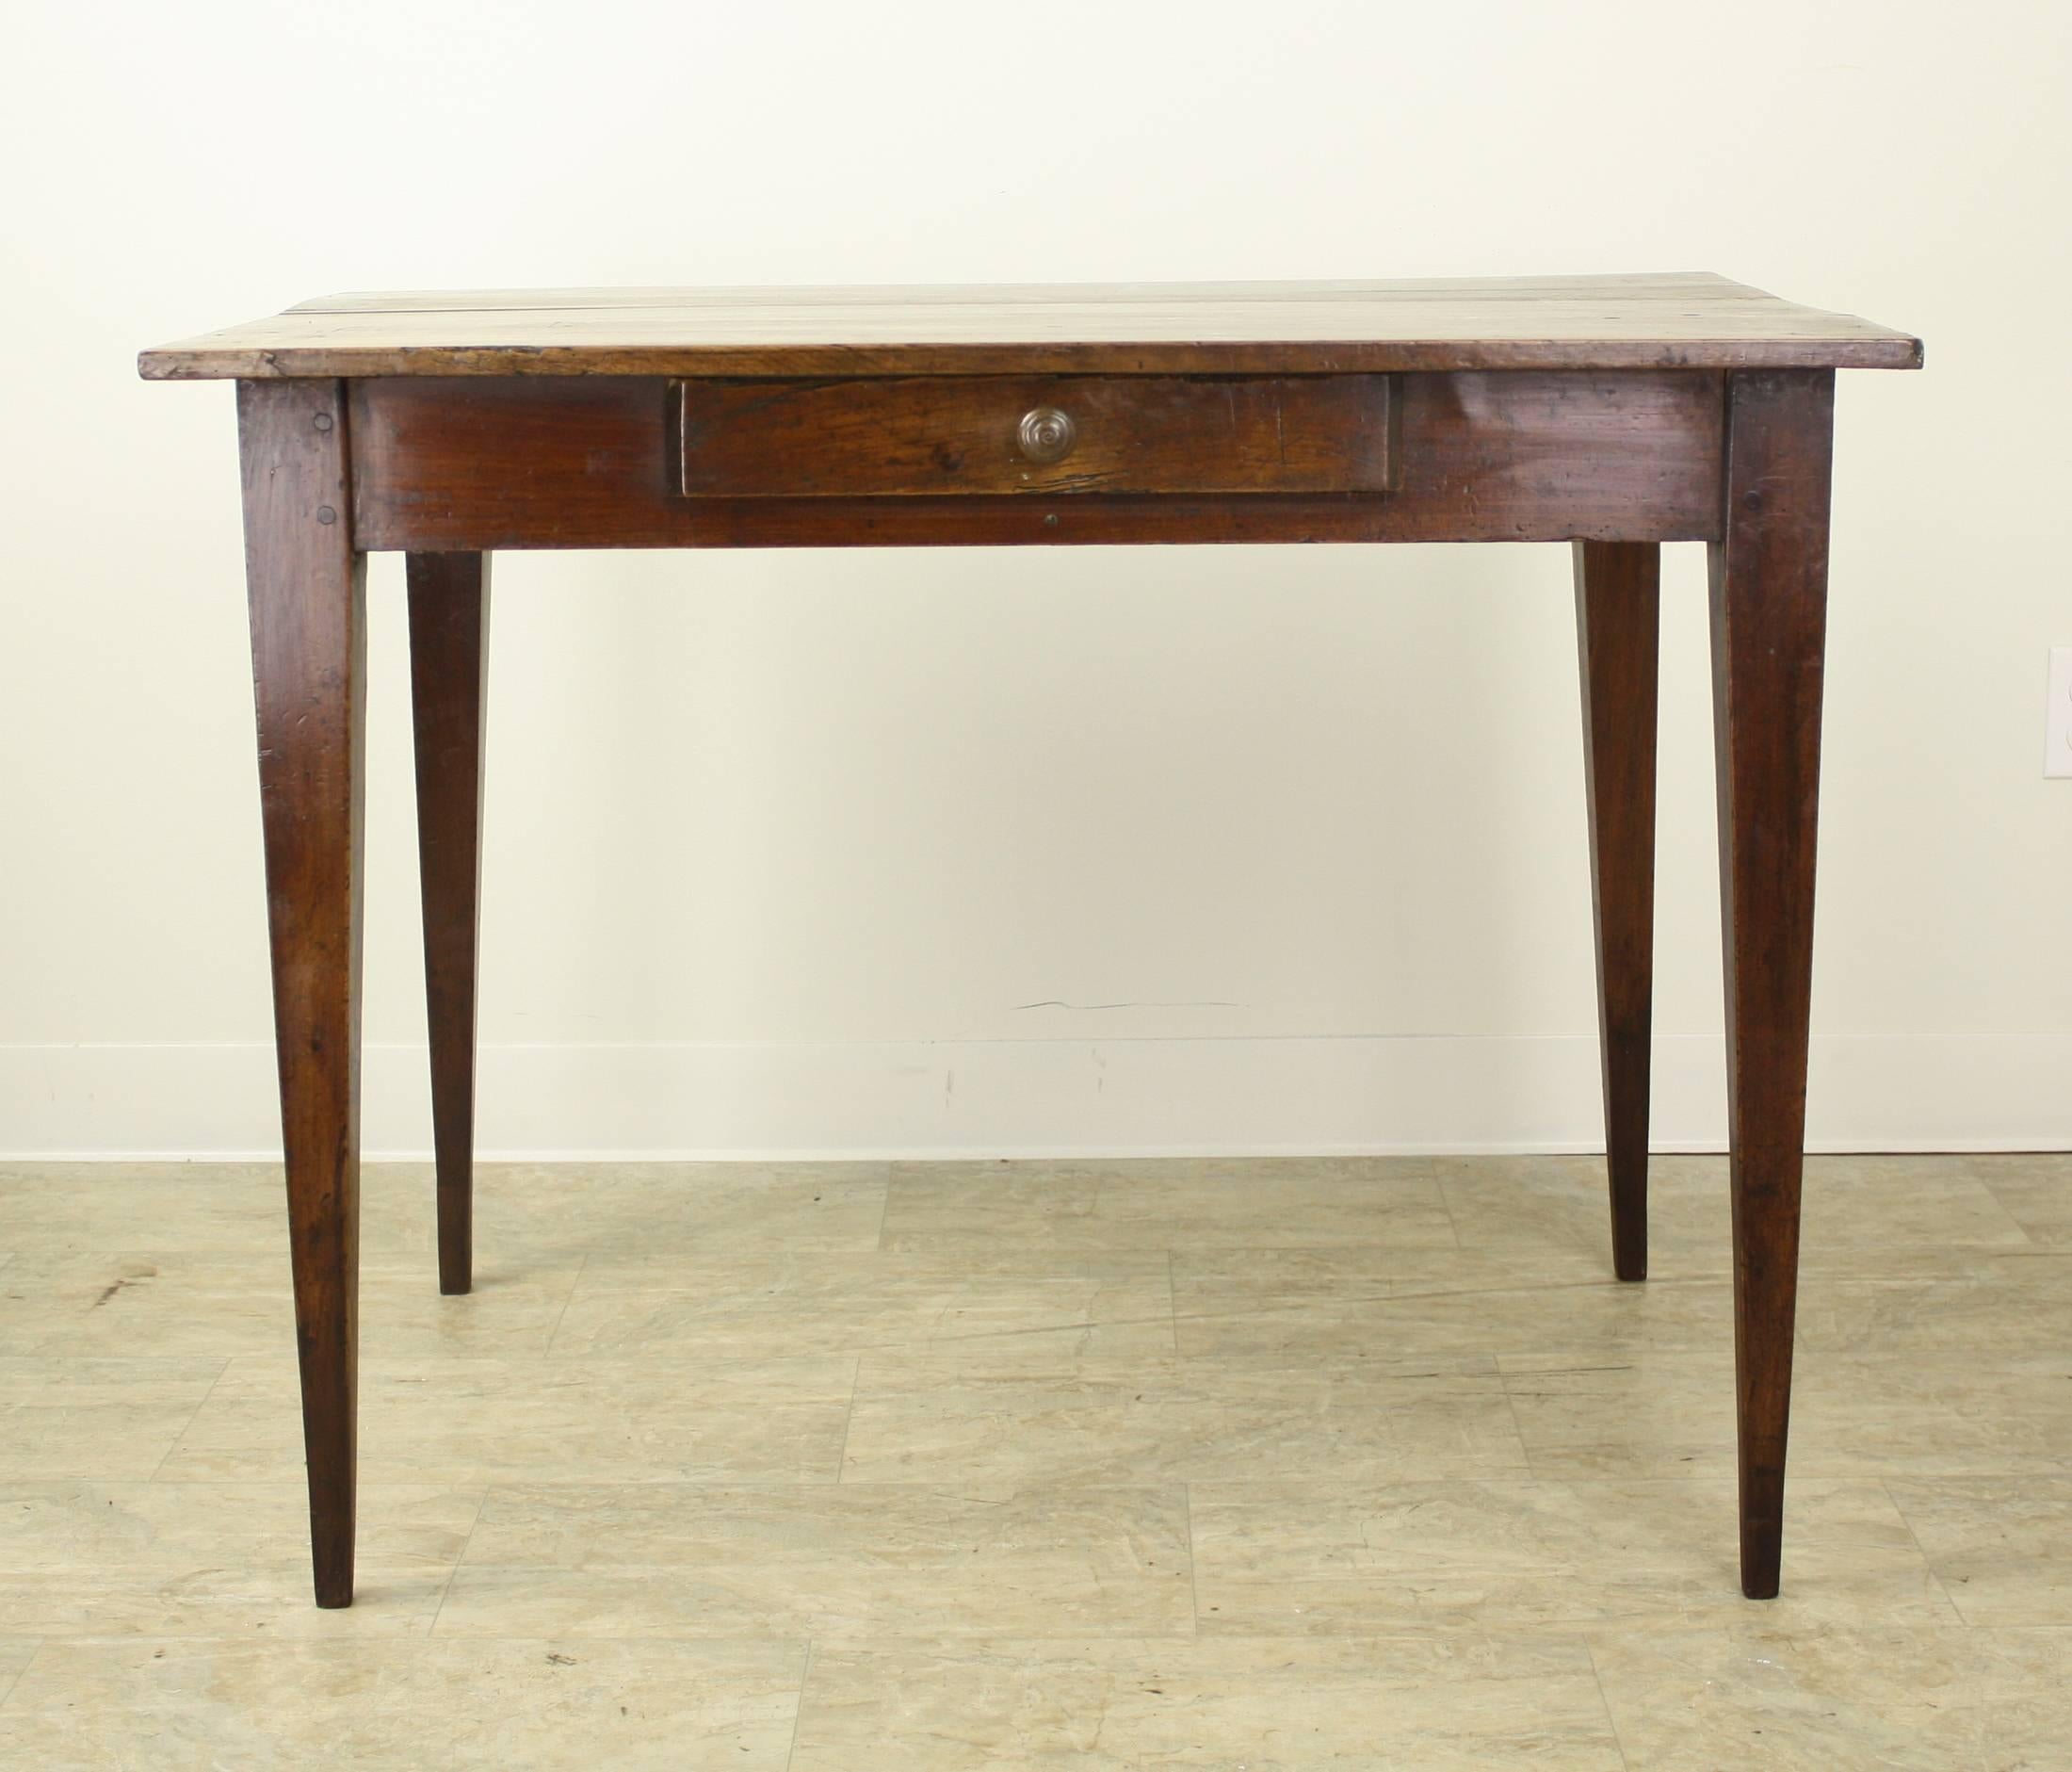 A pretty writing table, desk or side table with wonderful grain and patina. The thin elegant legs and single centre drawer complete the look. Apron height of 25.5